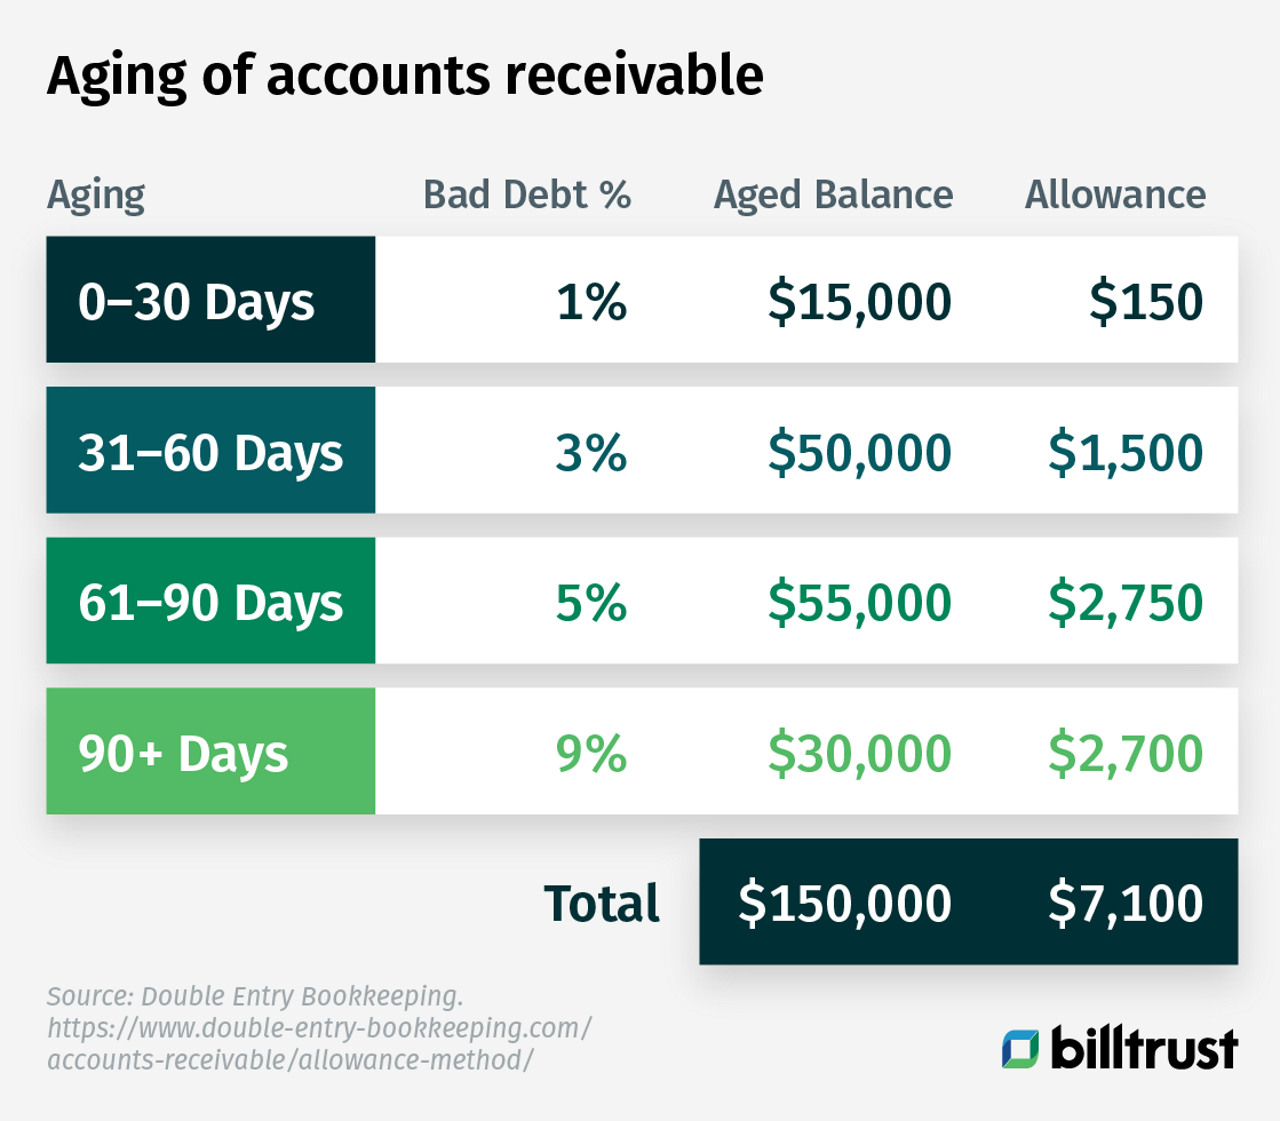 an example of an aging of accounts receivable